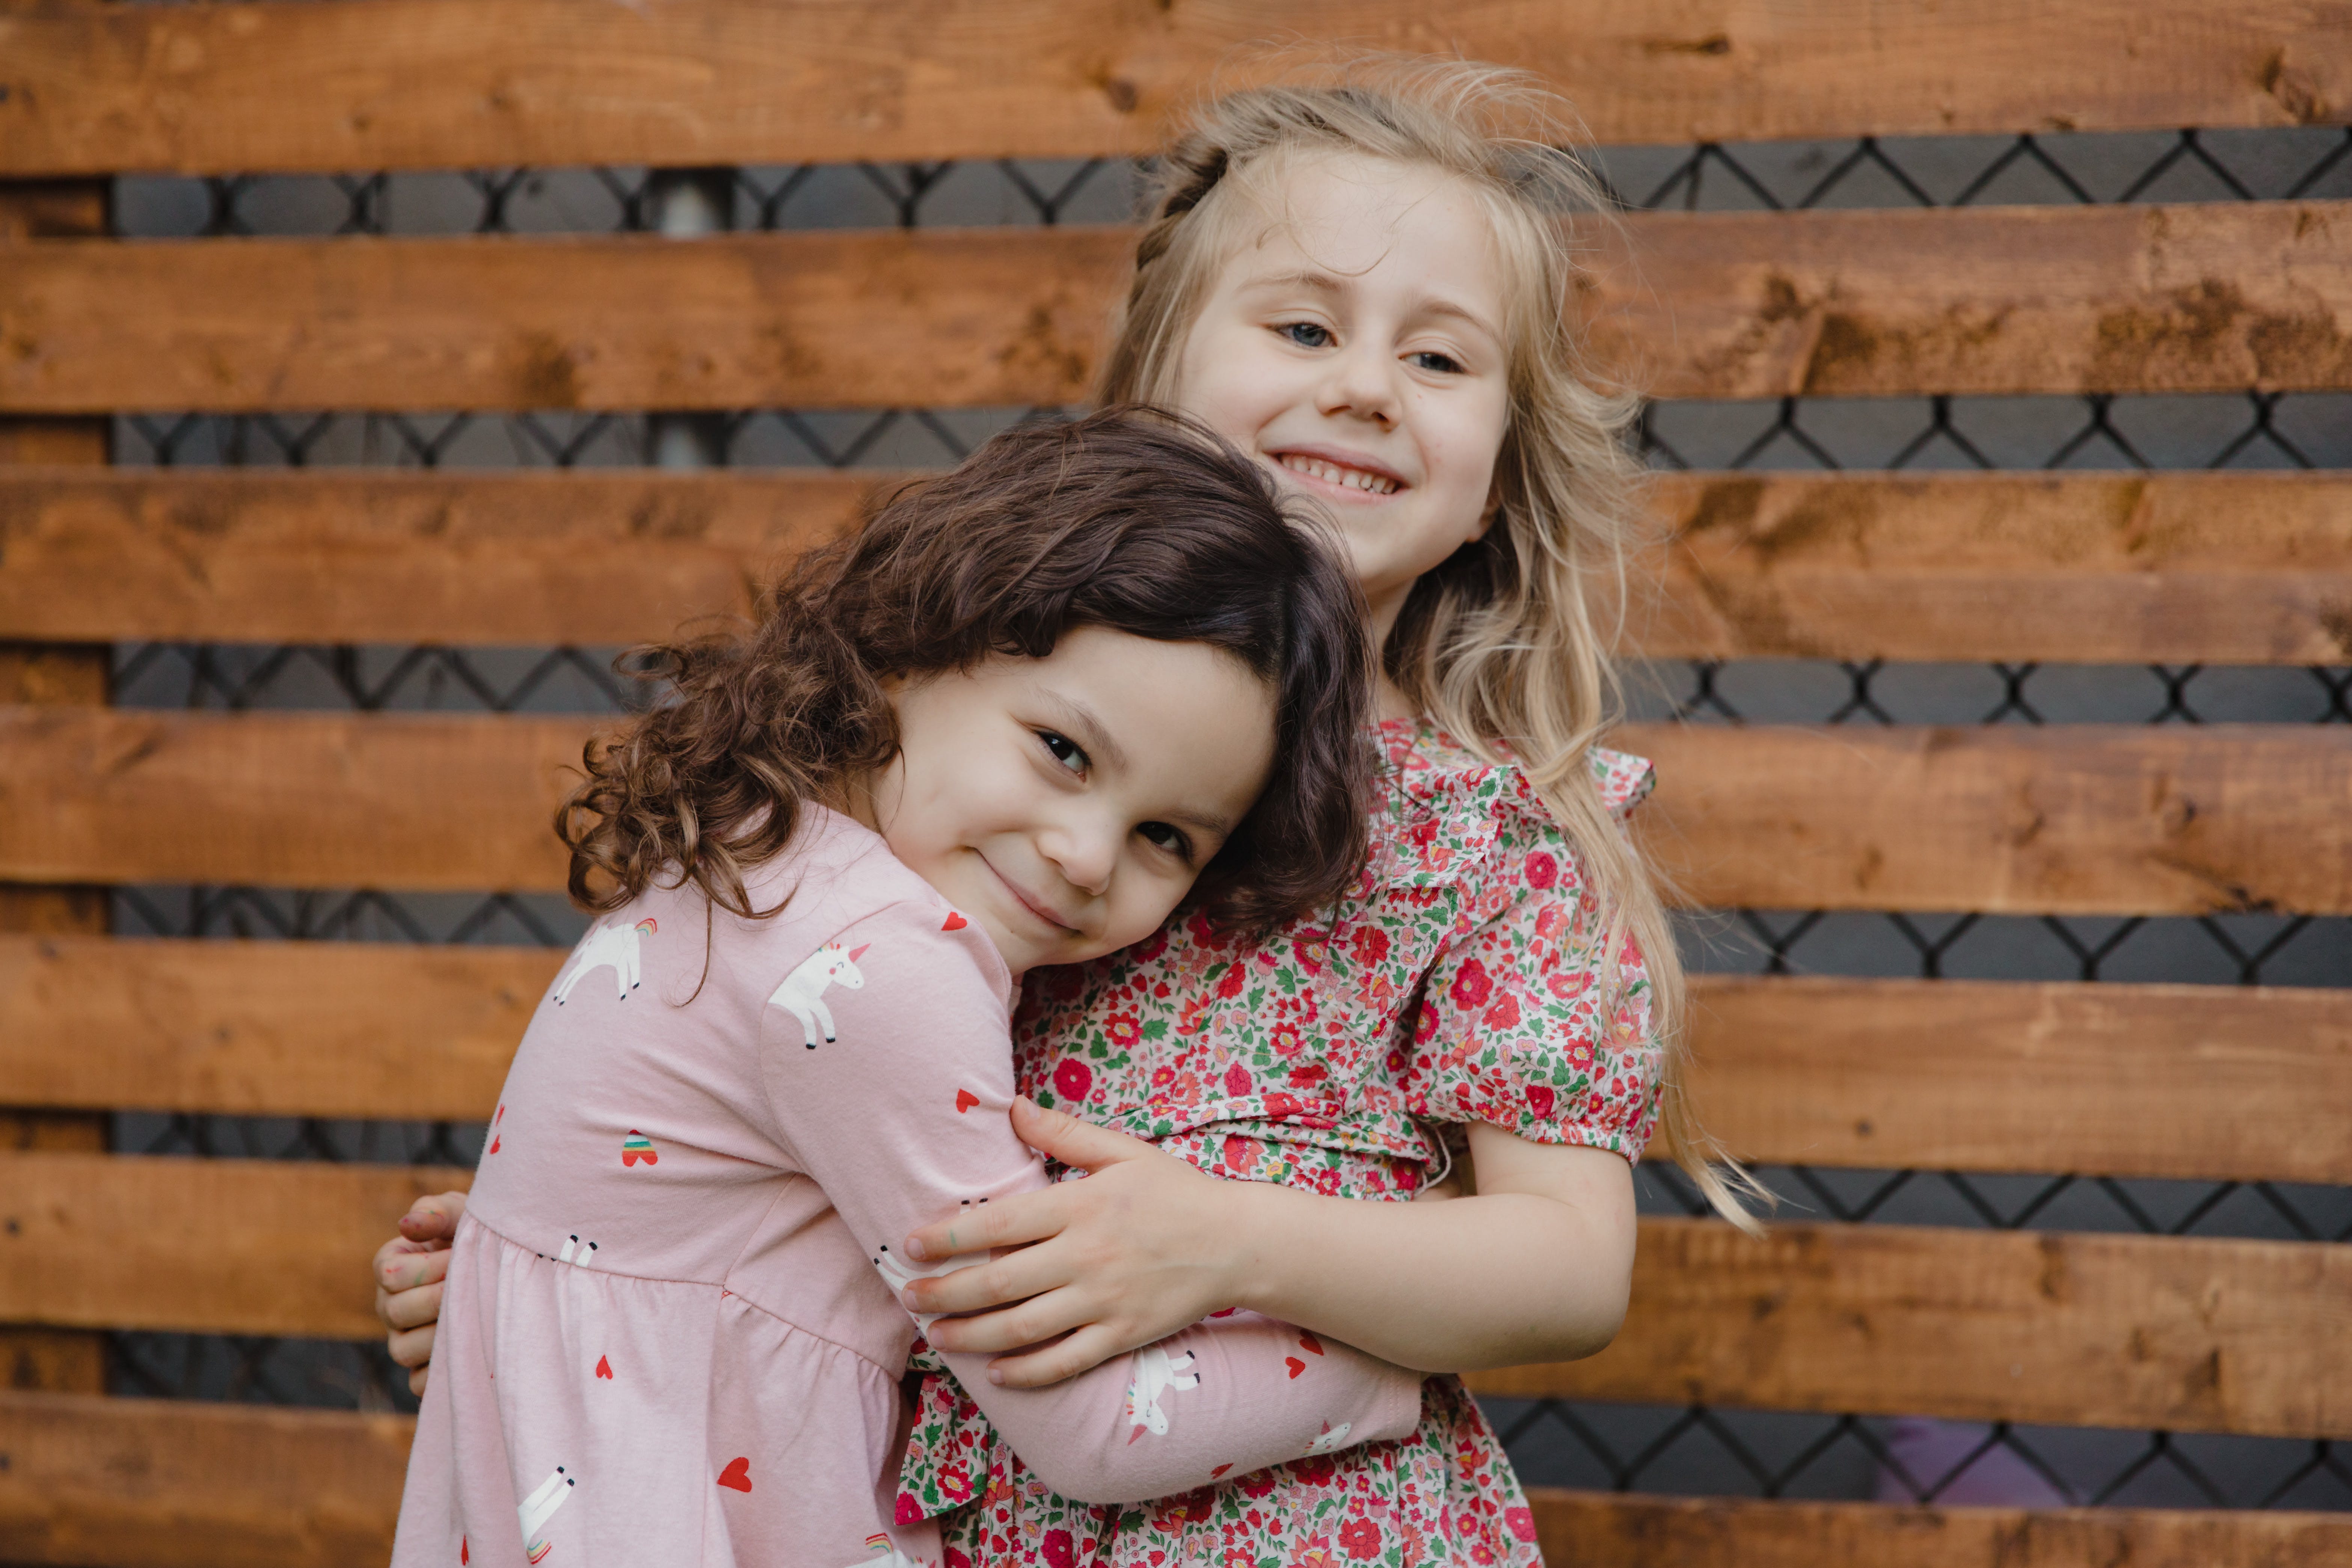 Two little girls sharing a hug | Source: Pexels